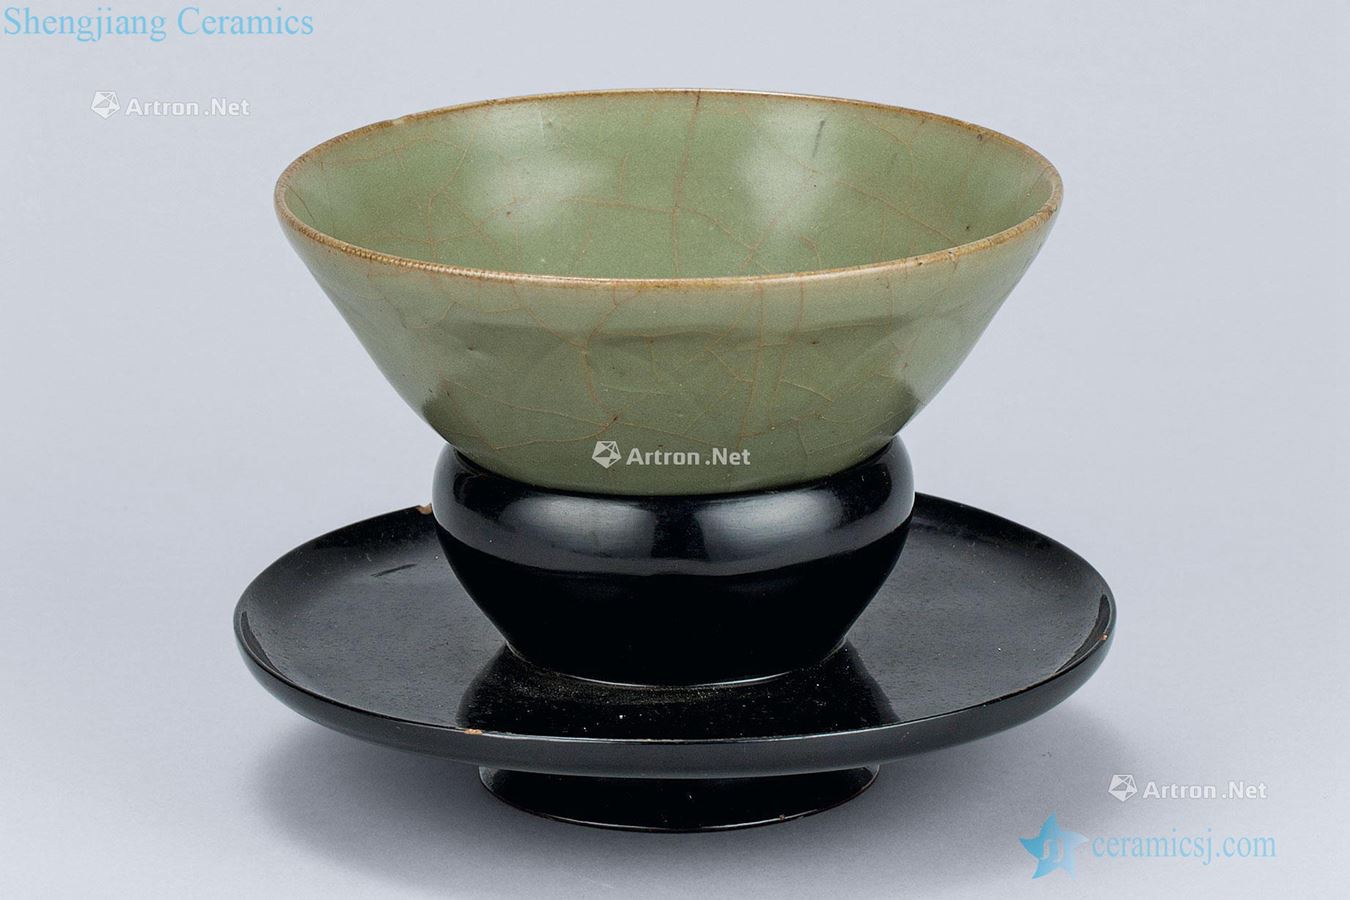 In the Ming dynasty (1368-1644), longquan celadon teacup